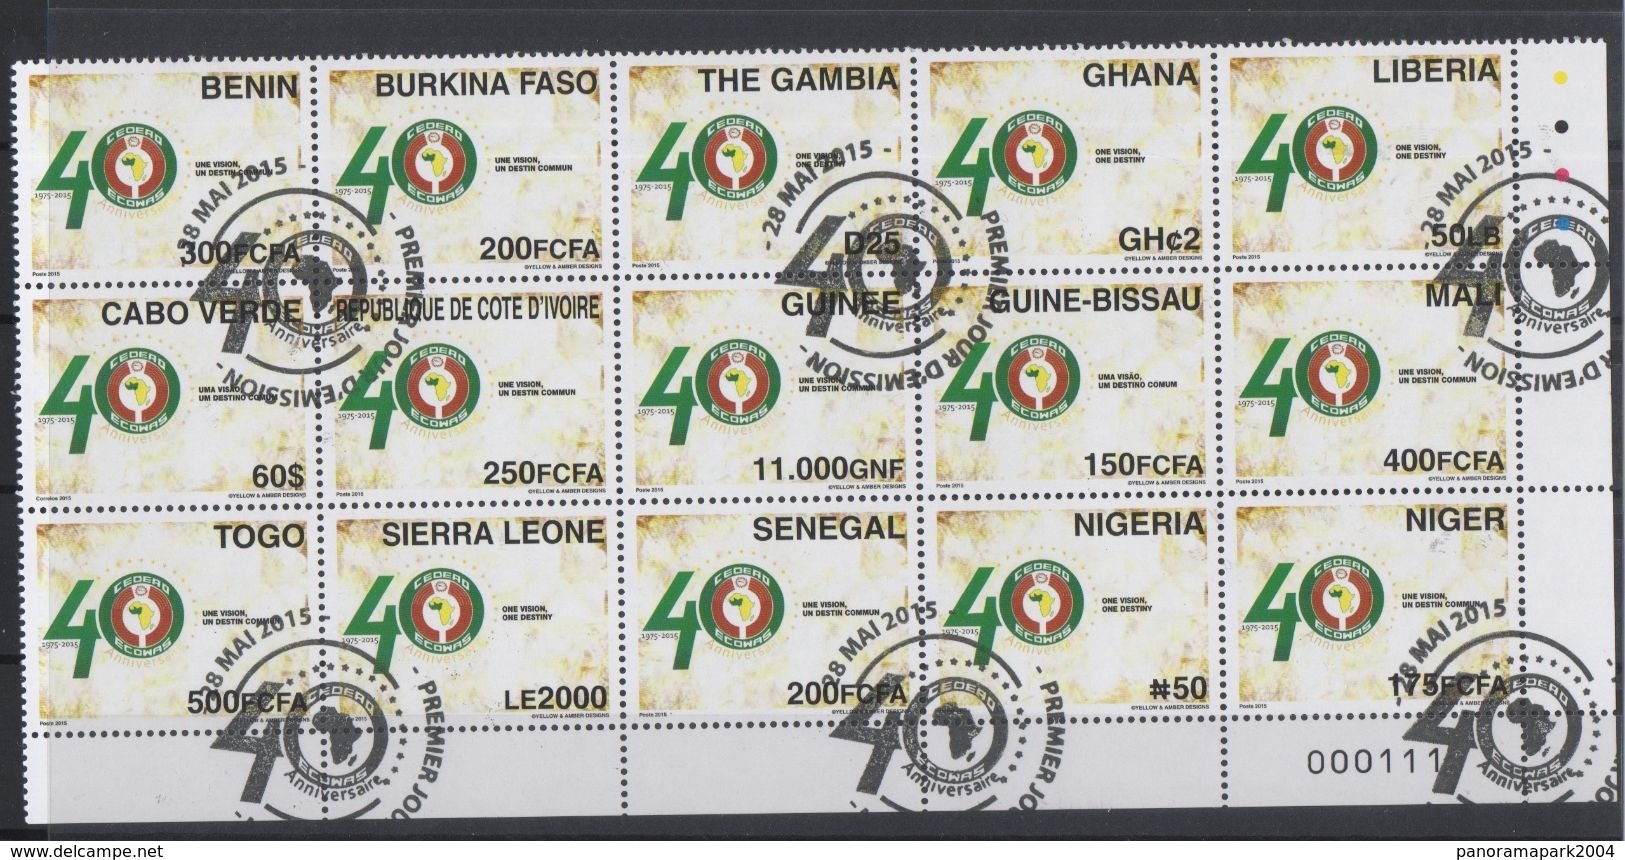 ULTRA RARE Feuille 15 Pays 15 Countries FDC SHEET 2015 Emission Commune Joint Issue CEDEAO ECOWAS 40 Ans 40 Years - Emisiones Comunes